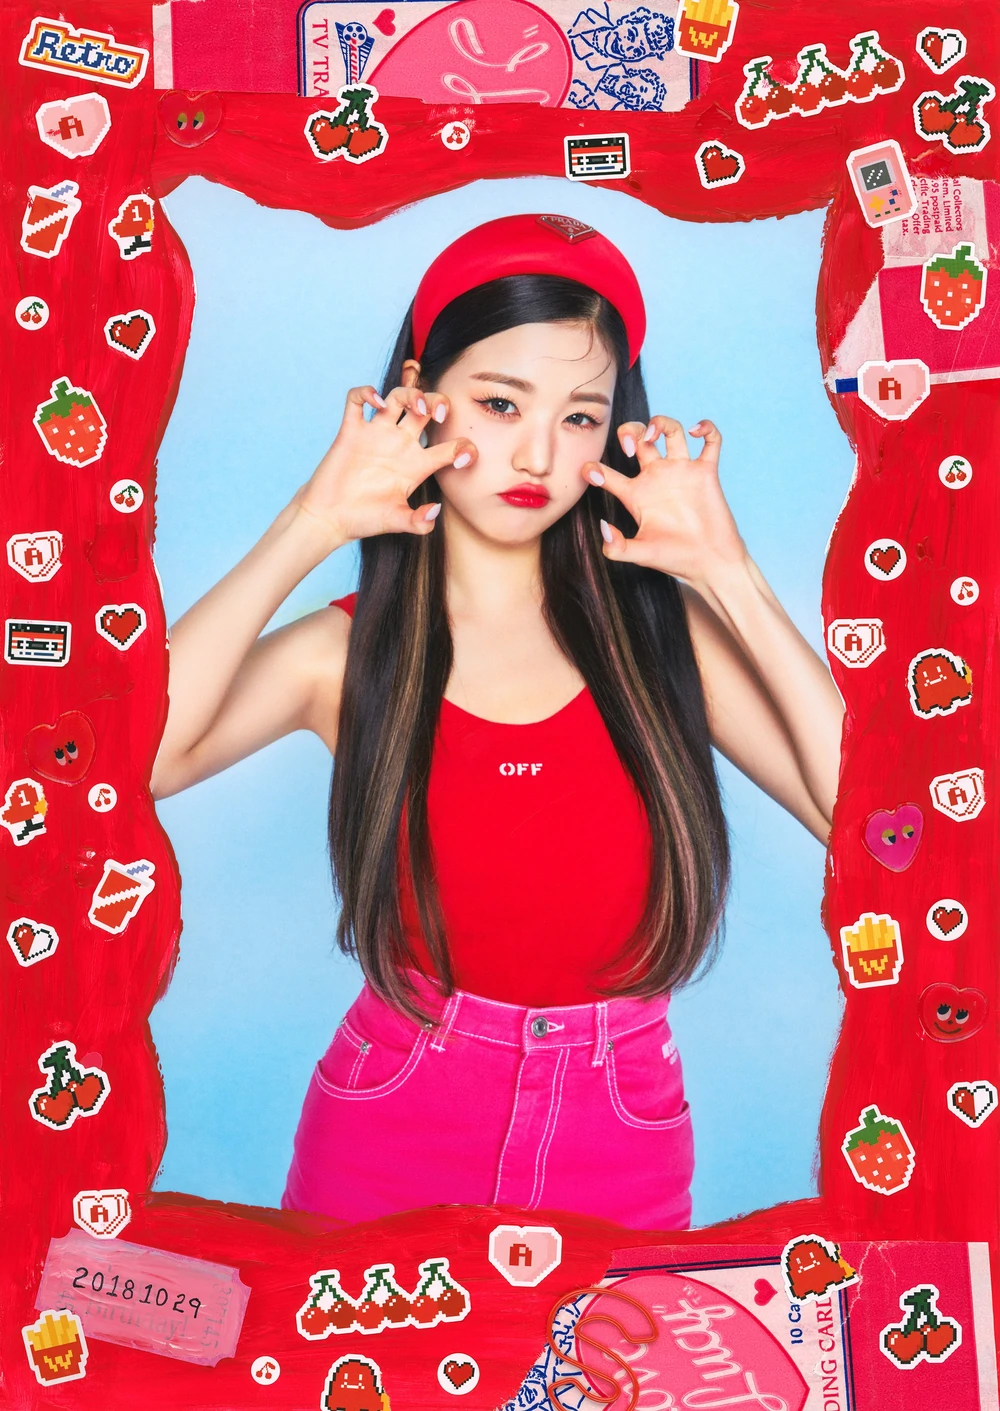 IZ*ONE Oneiric Diary Wonyoung Concept Teaser Picture Image Photo Kpop K-Concept 5